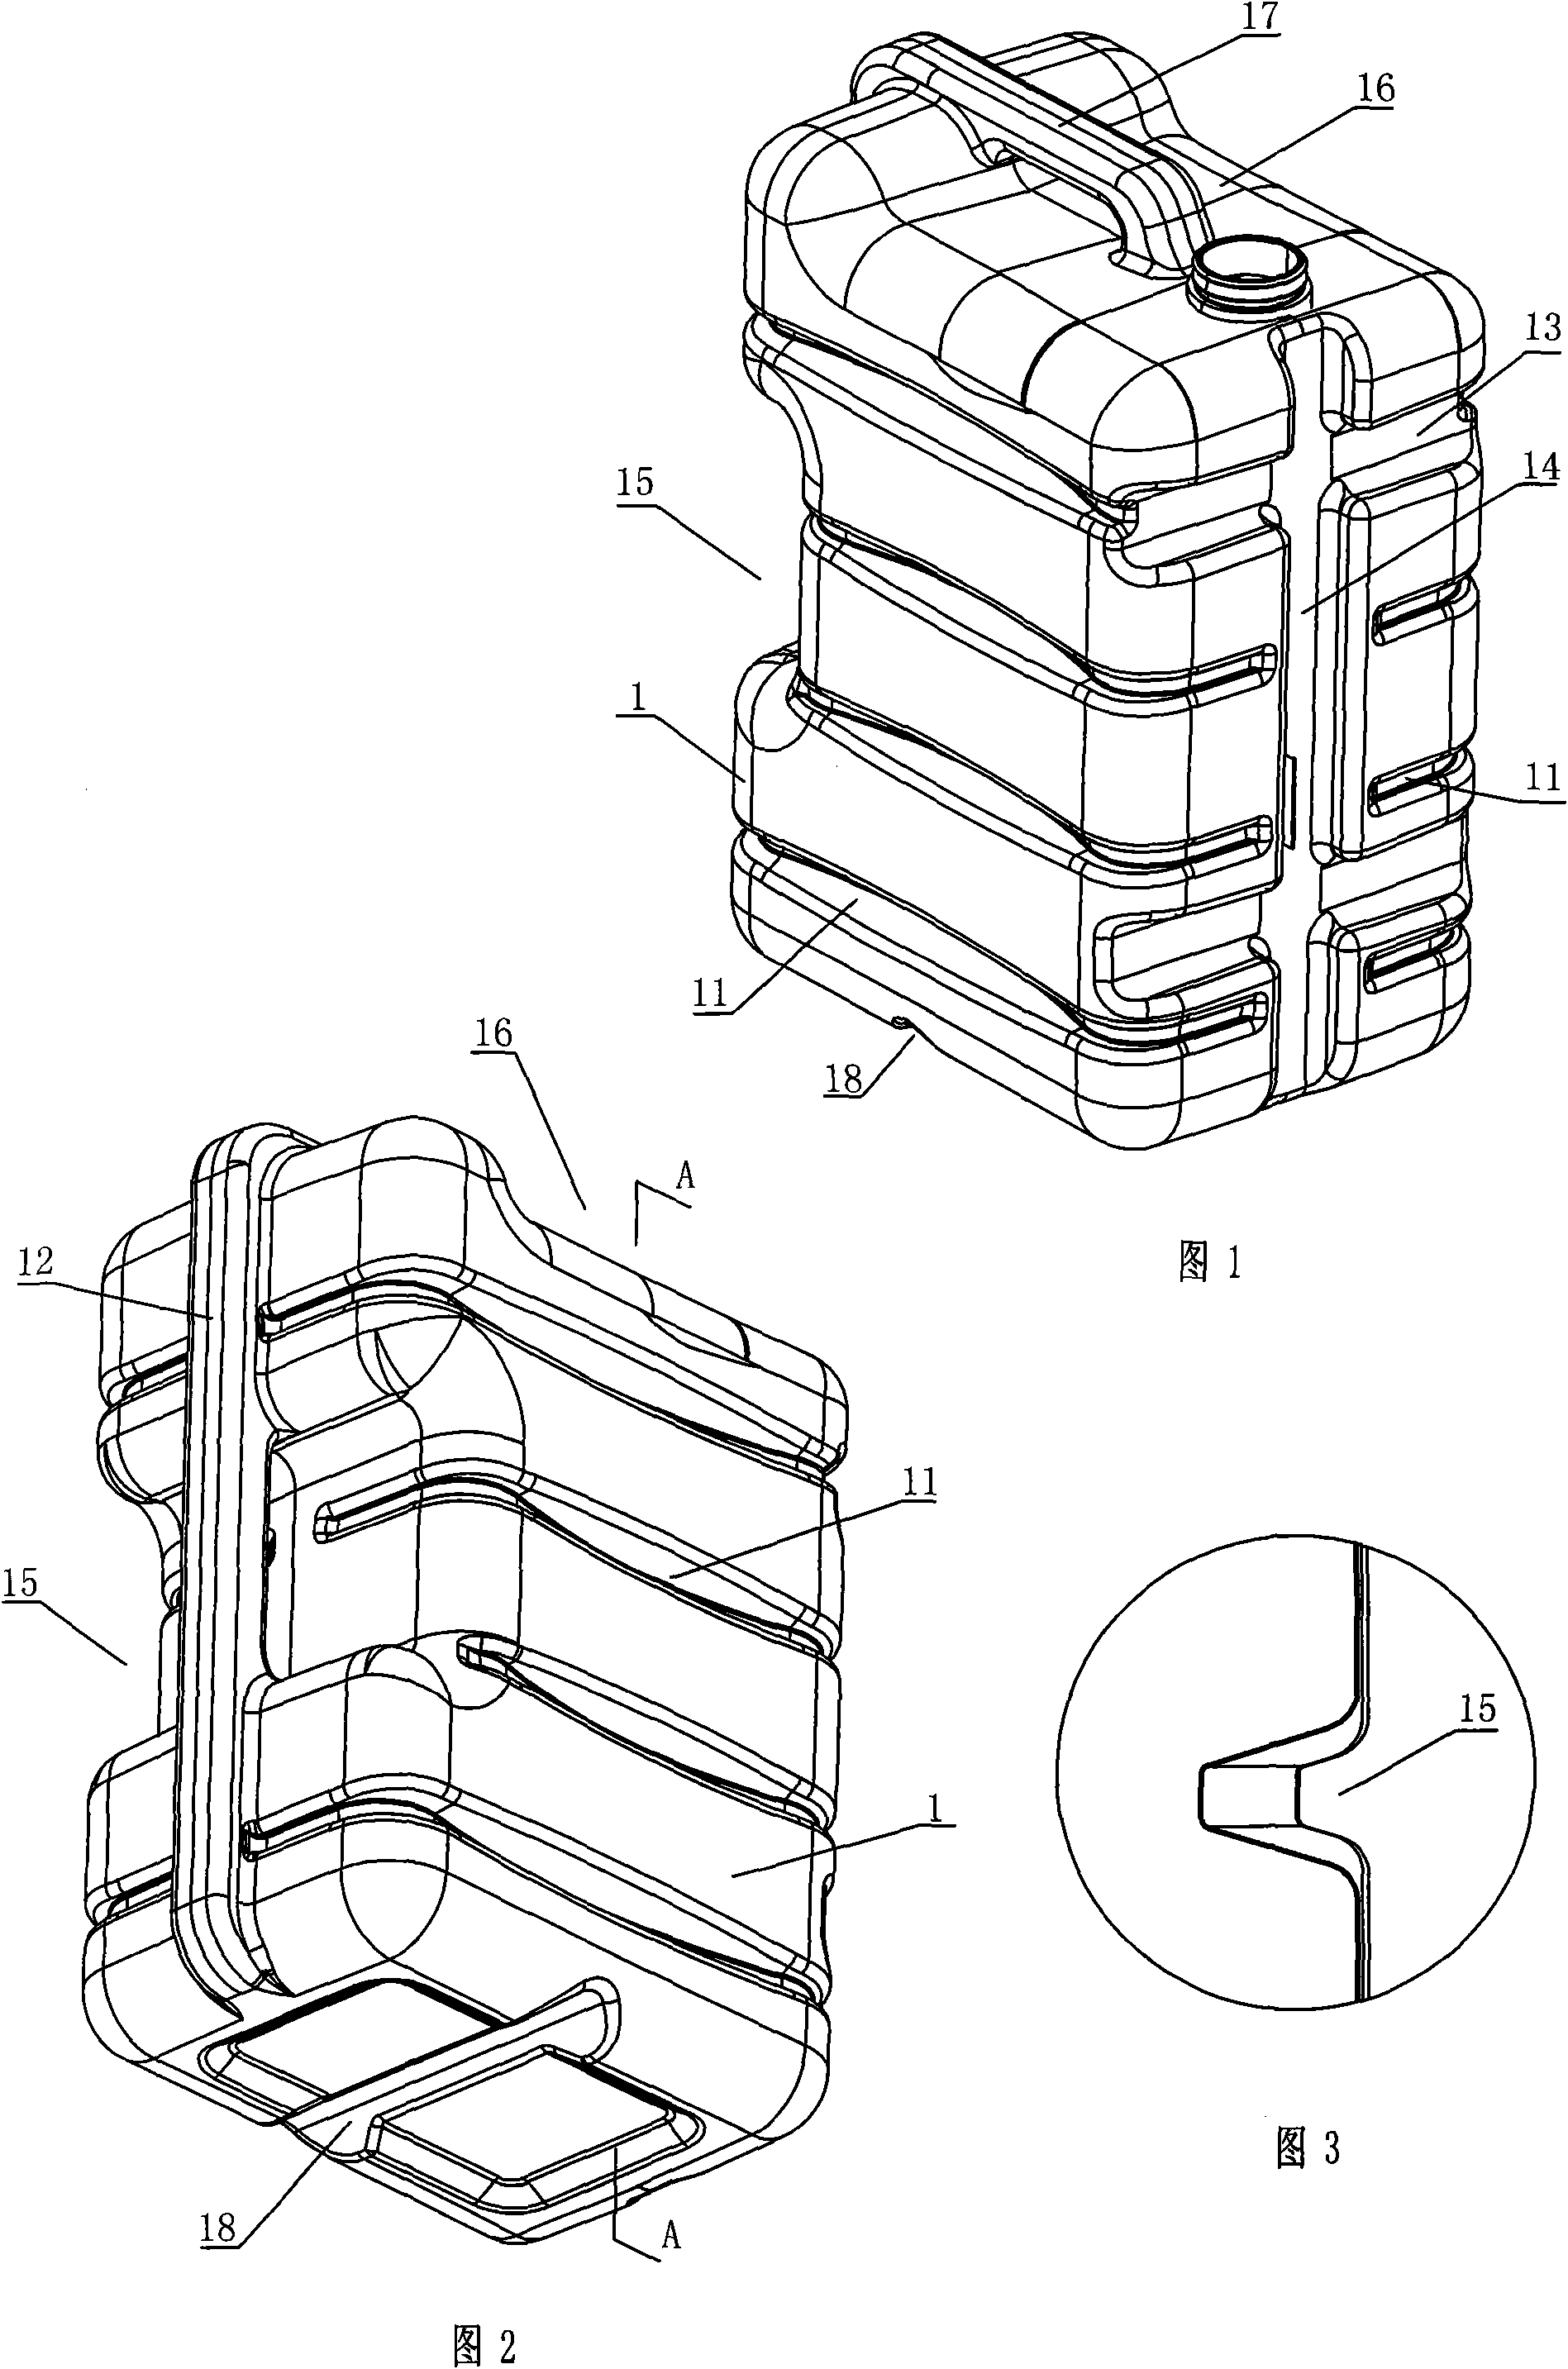 Bottle body with reinforcing ribs